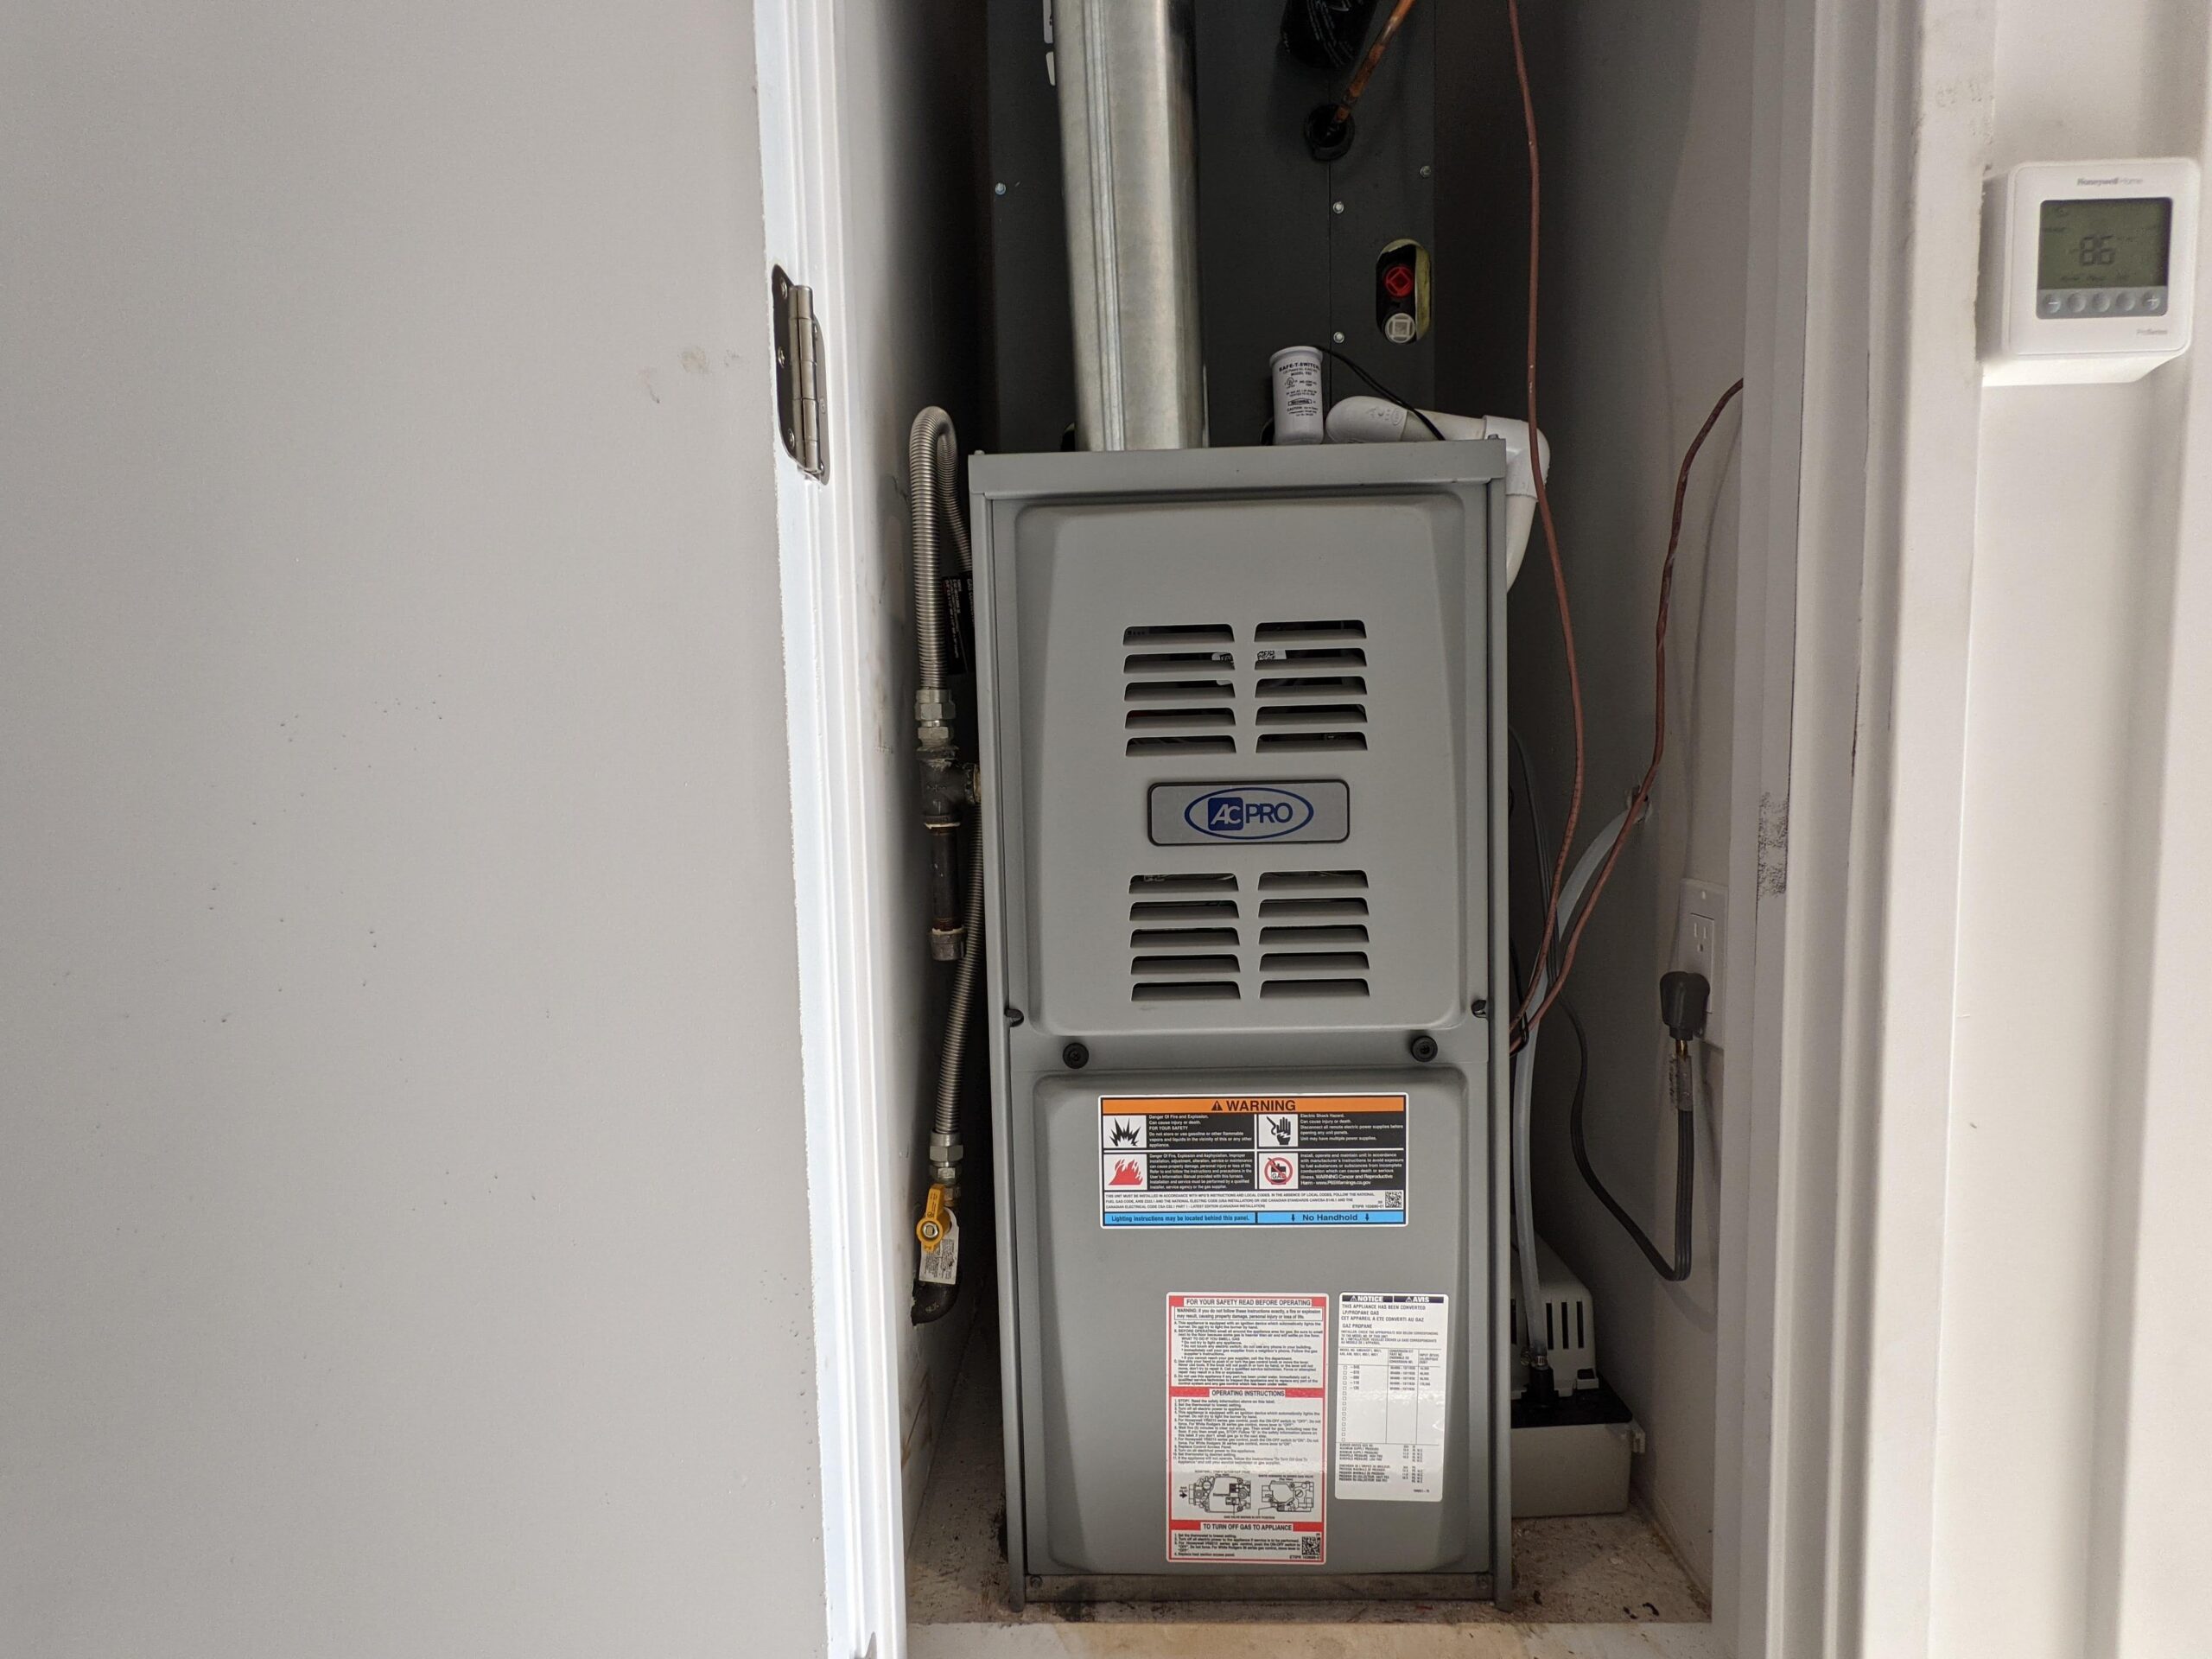 AC PRO gas furnace installed by Accord Air in San Diego, CA.